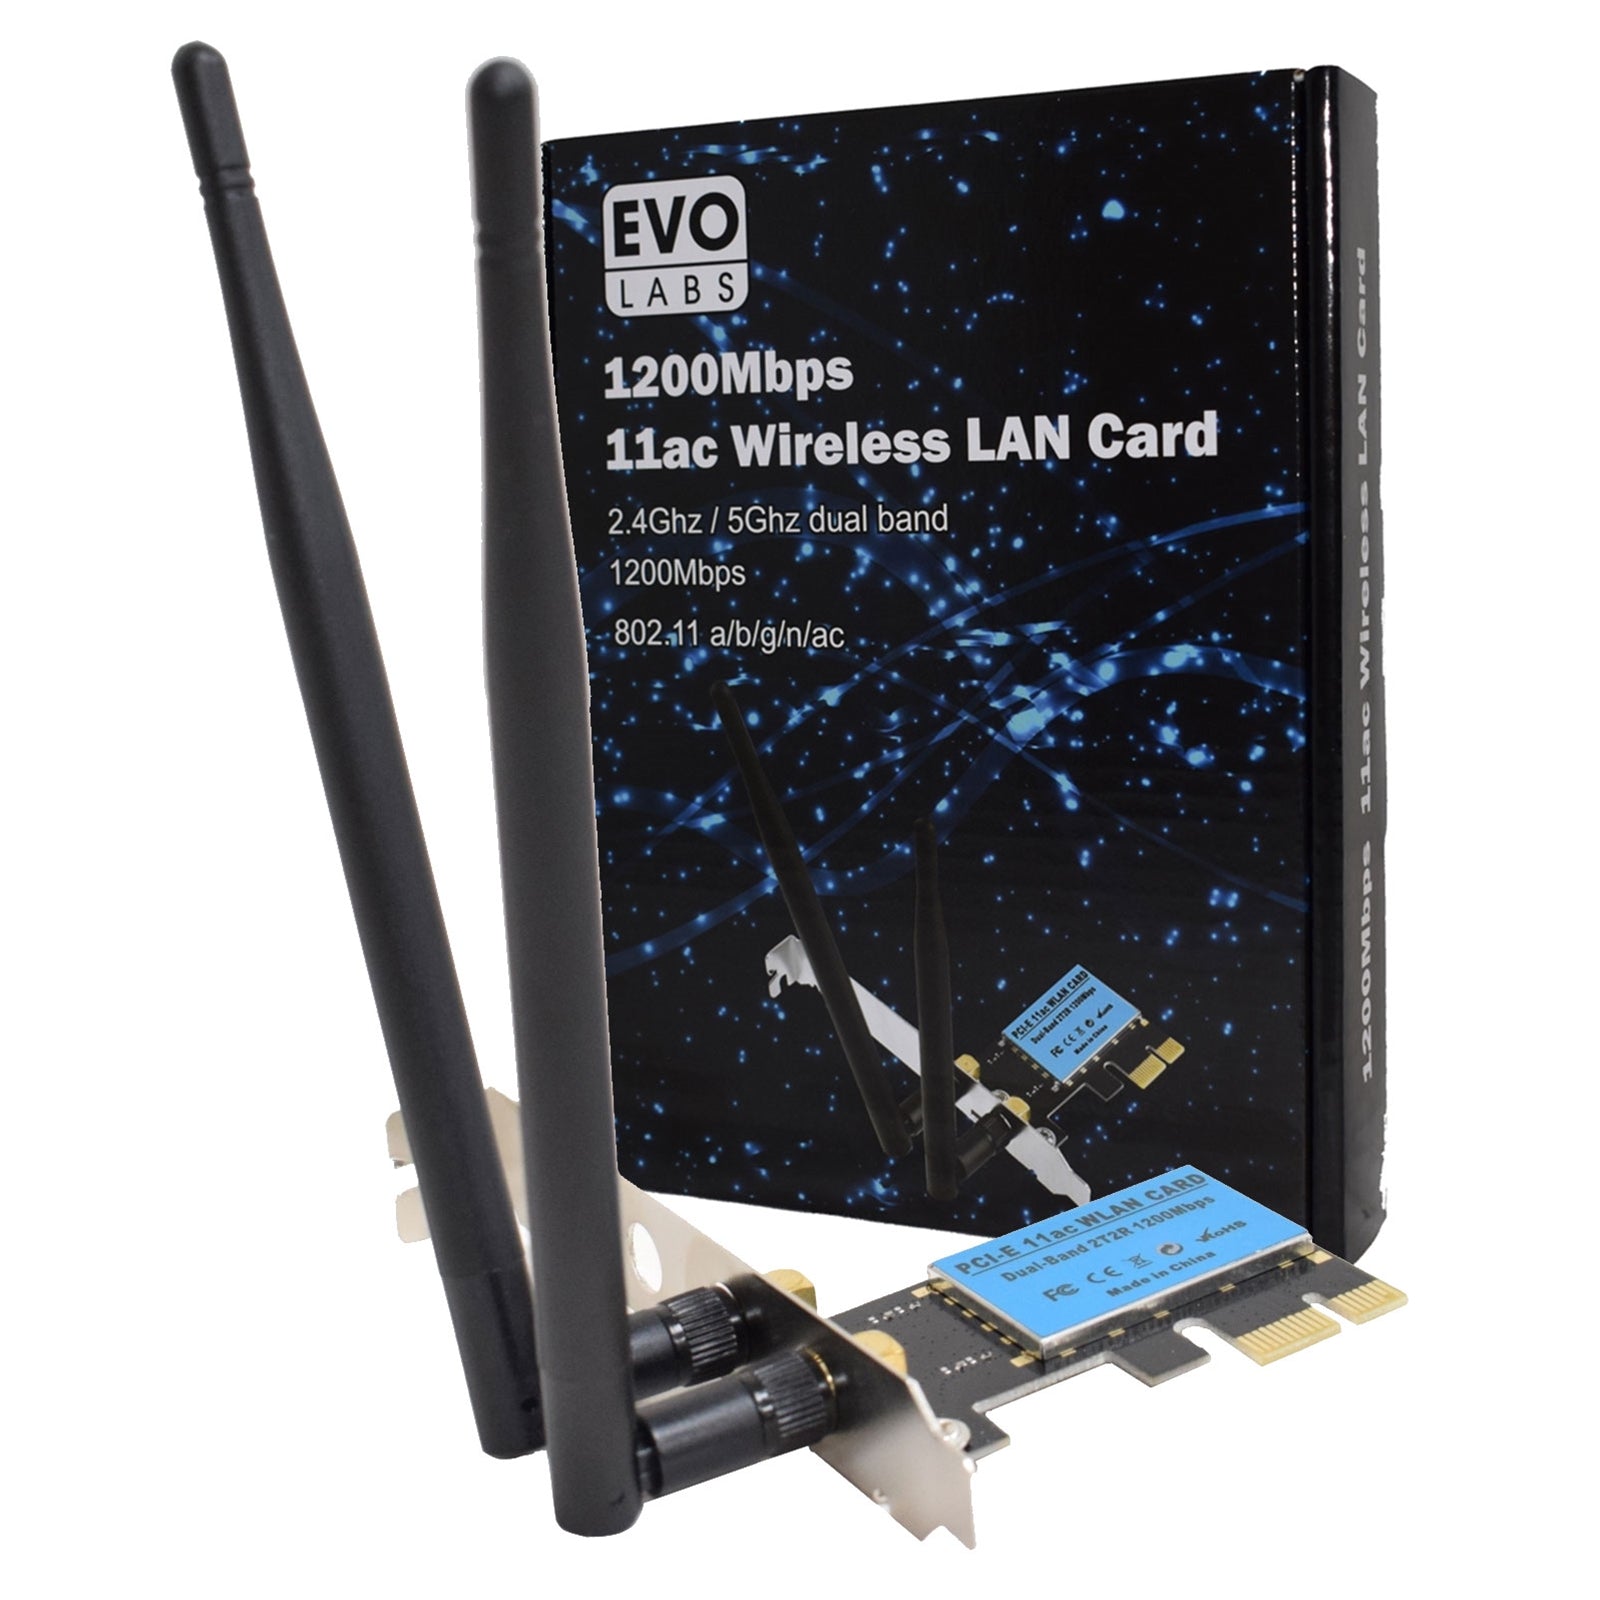 Photos - Network Card Evo Labs Evo Labs PCI-Express Full Height AC1200 Dual Band WiFi Card with